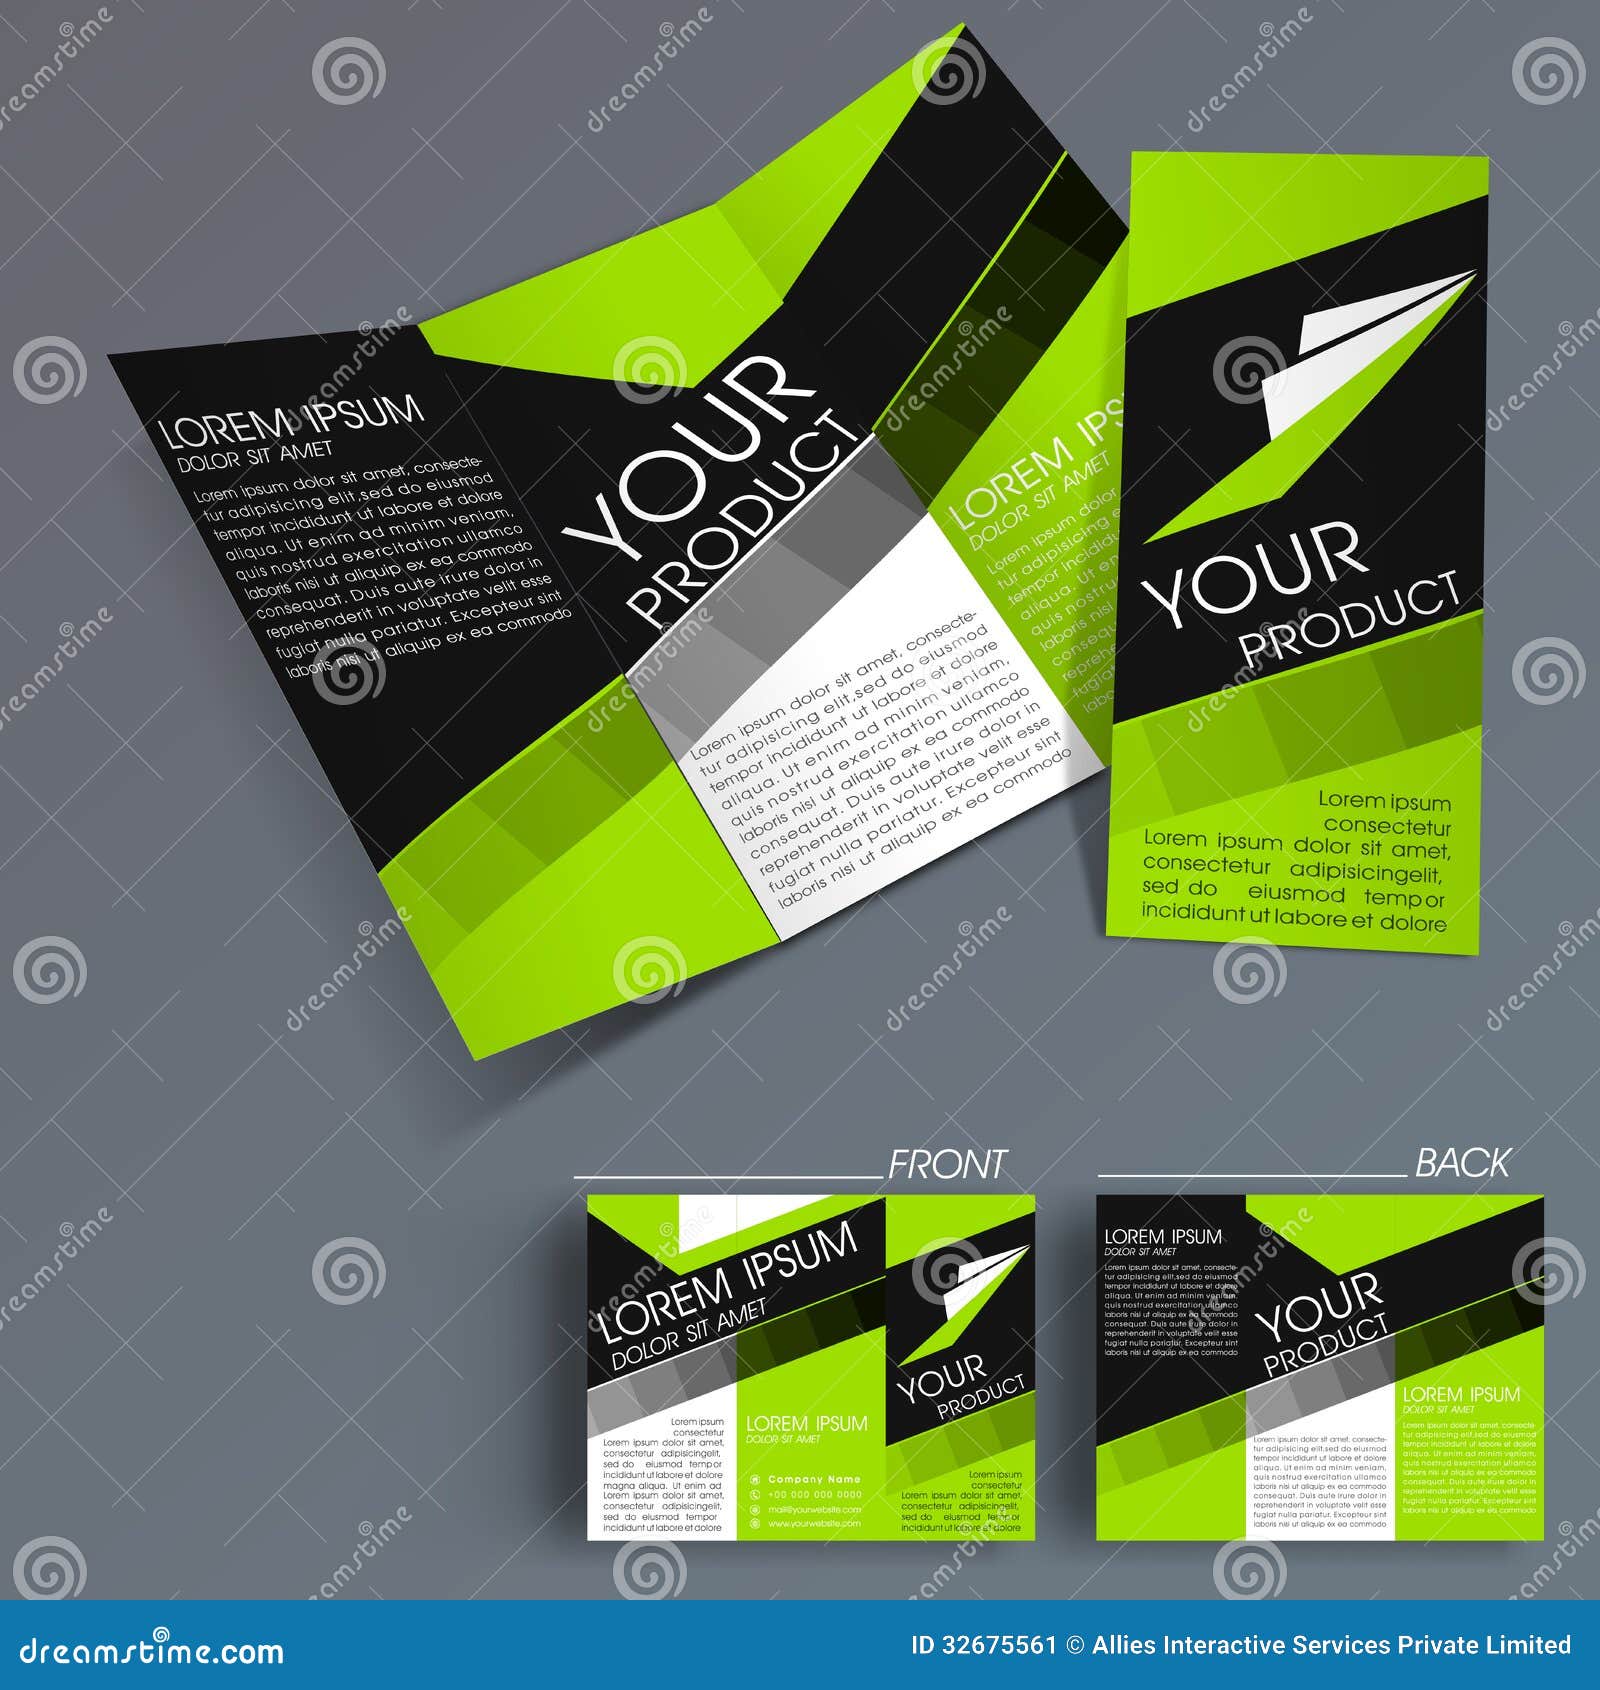 Professional Business Three Fold Flyer Template, Stock Throughout Three Fold Card Template